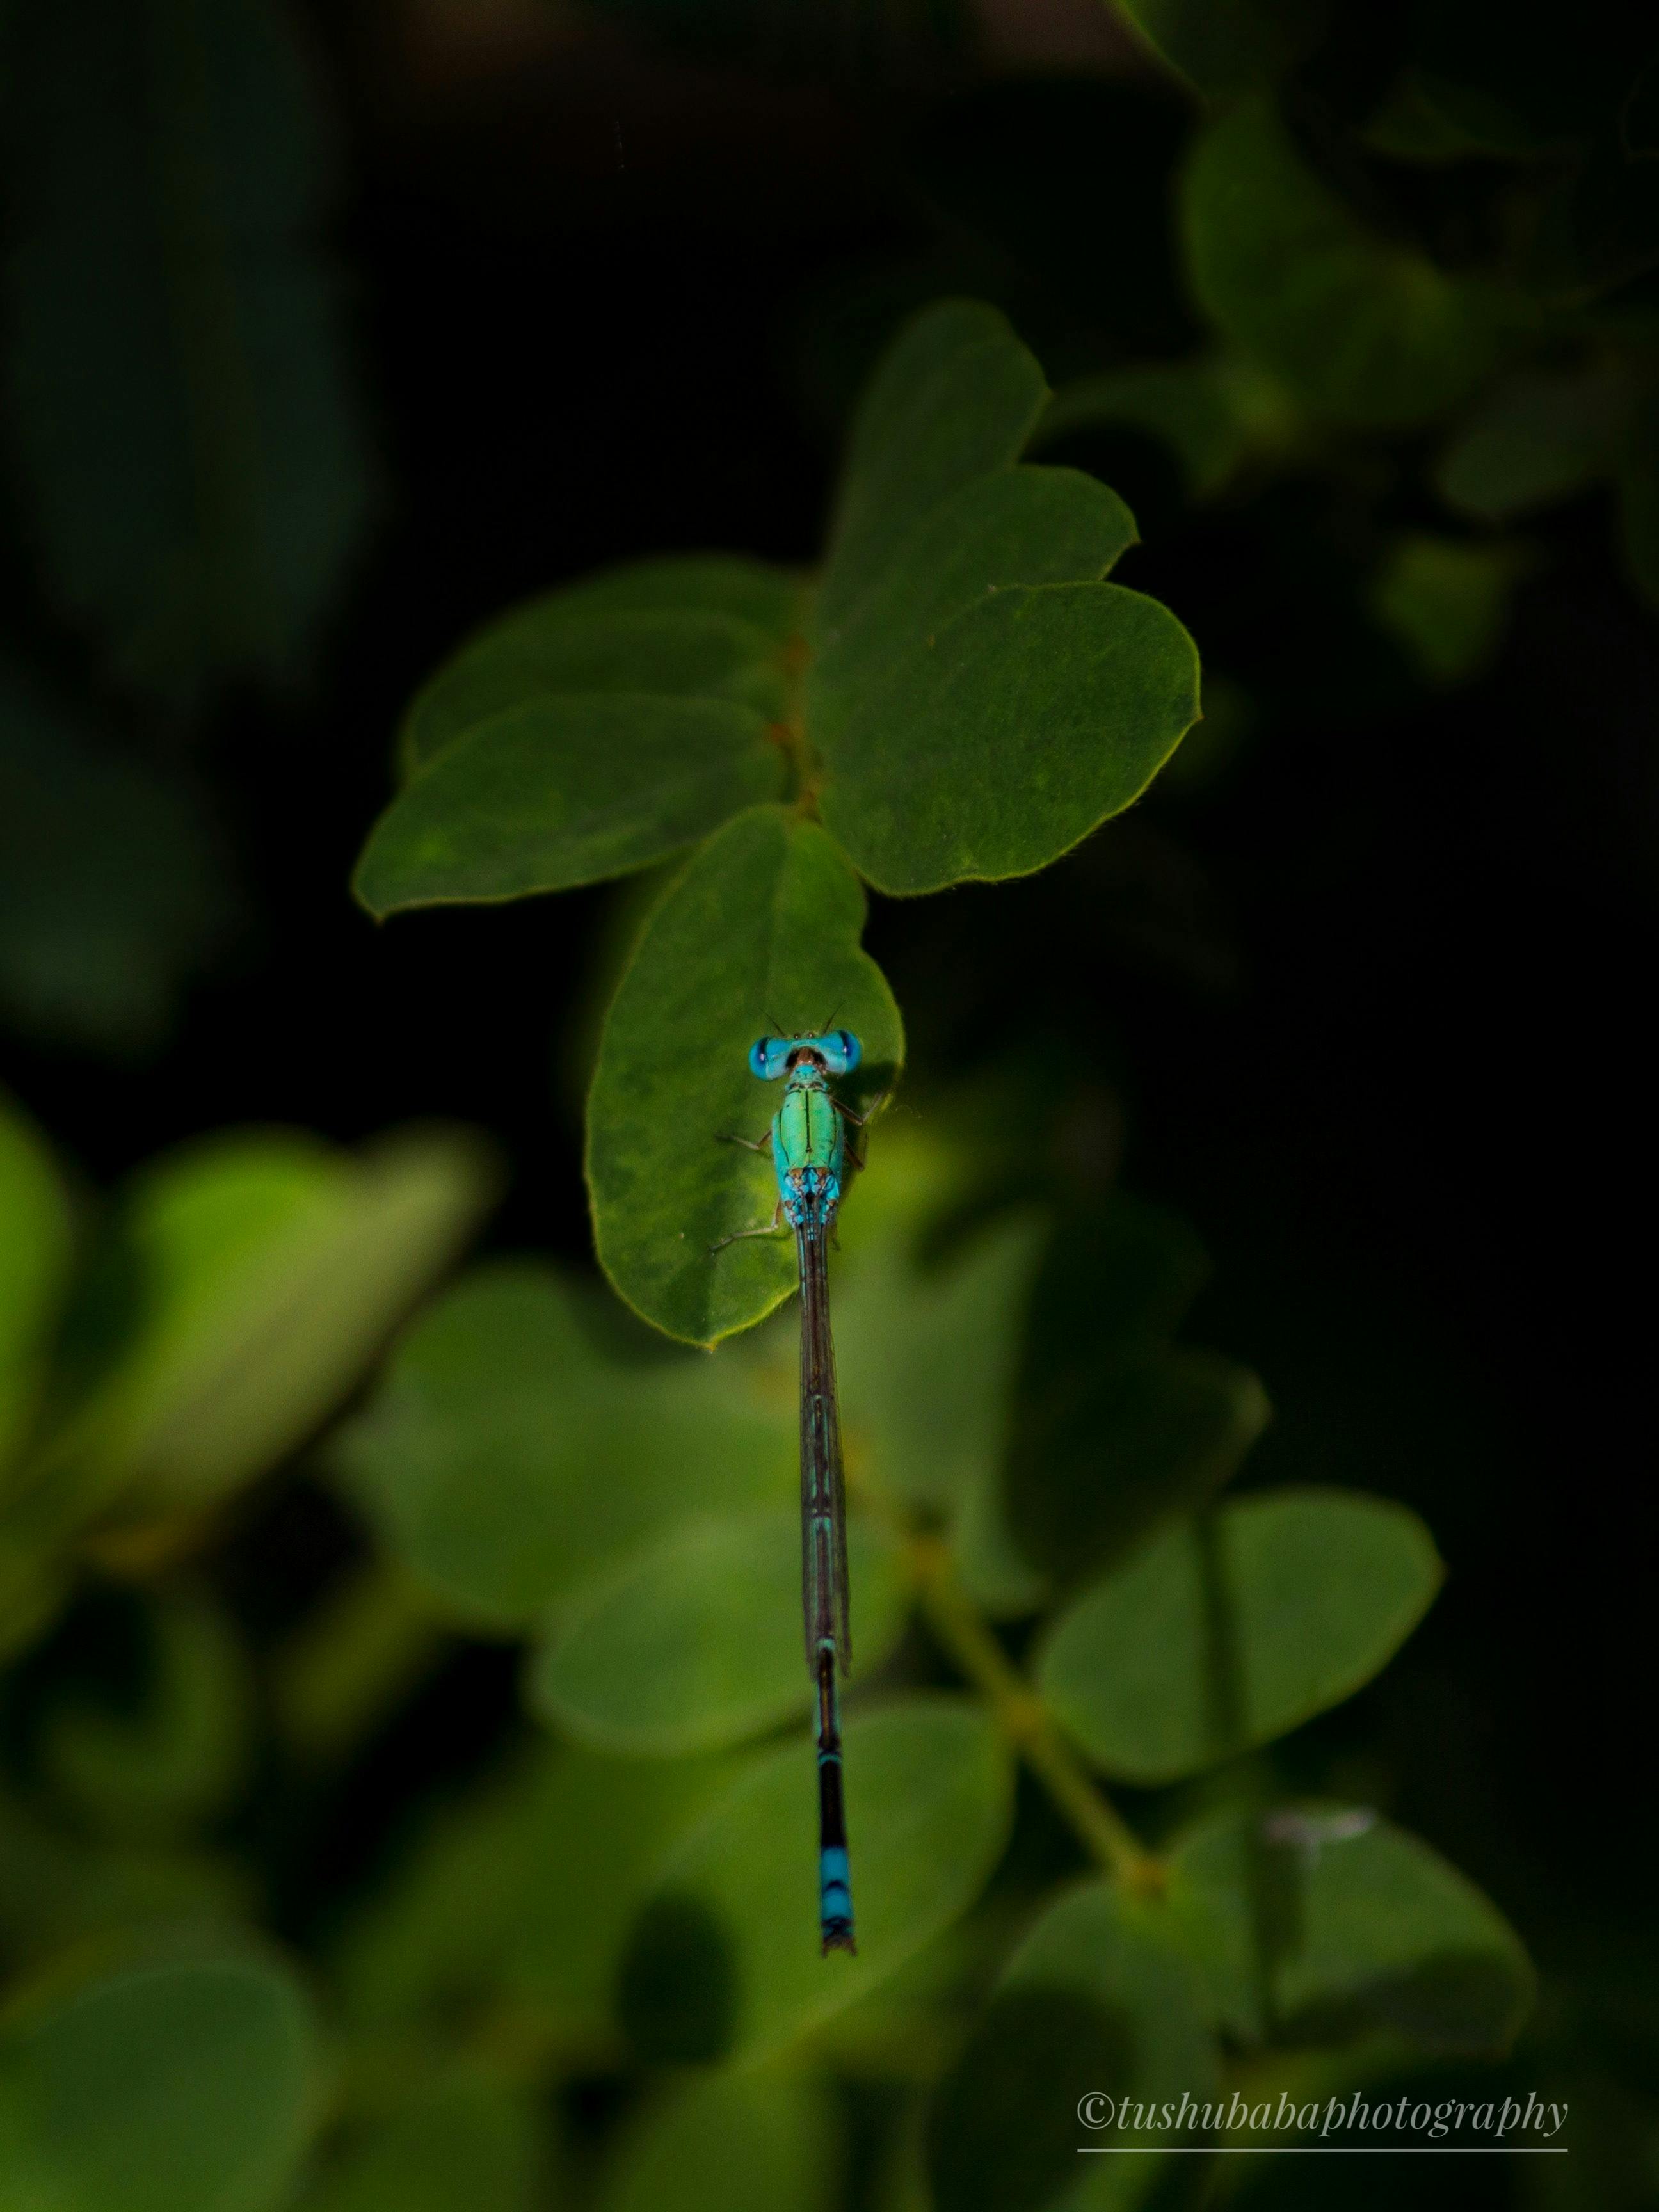 Free stock photo of dragonflies, nature, nature photography